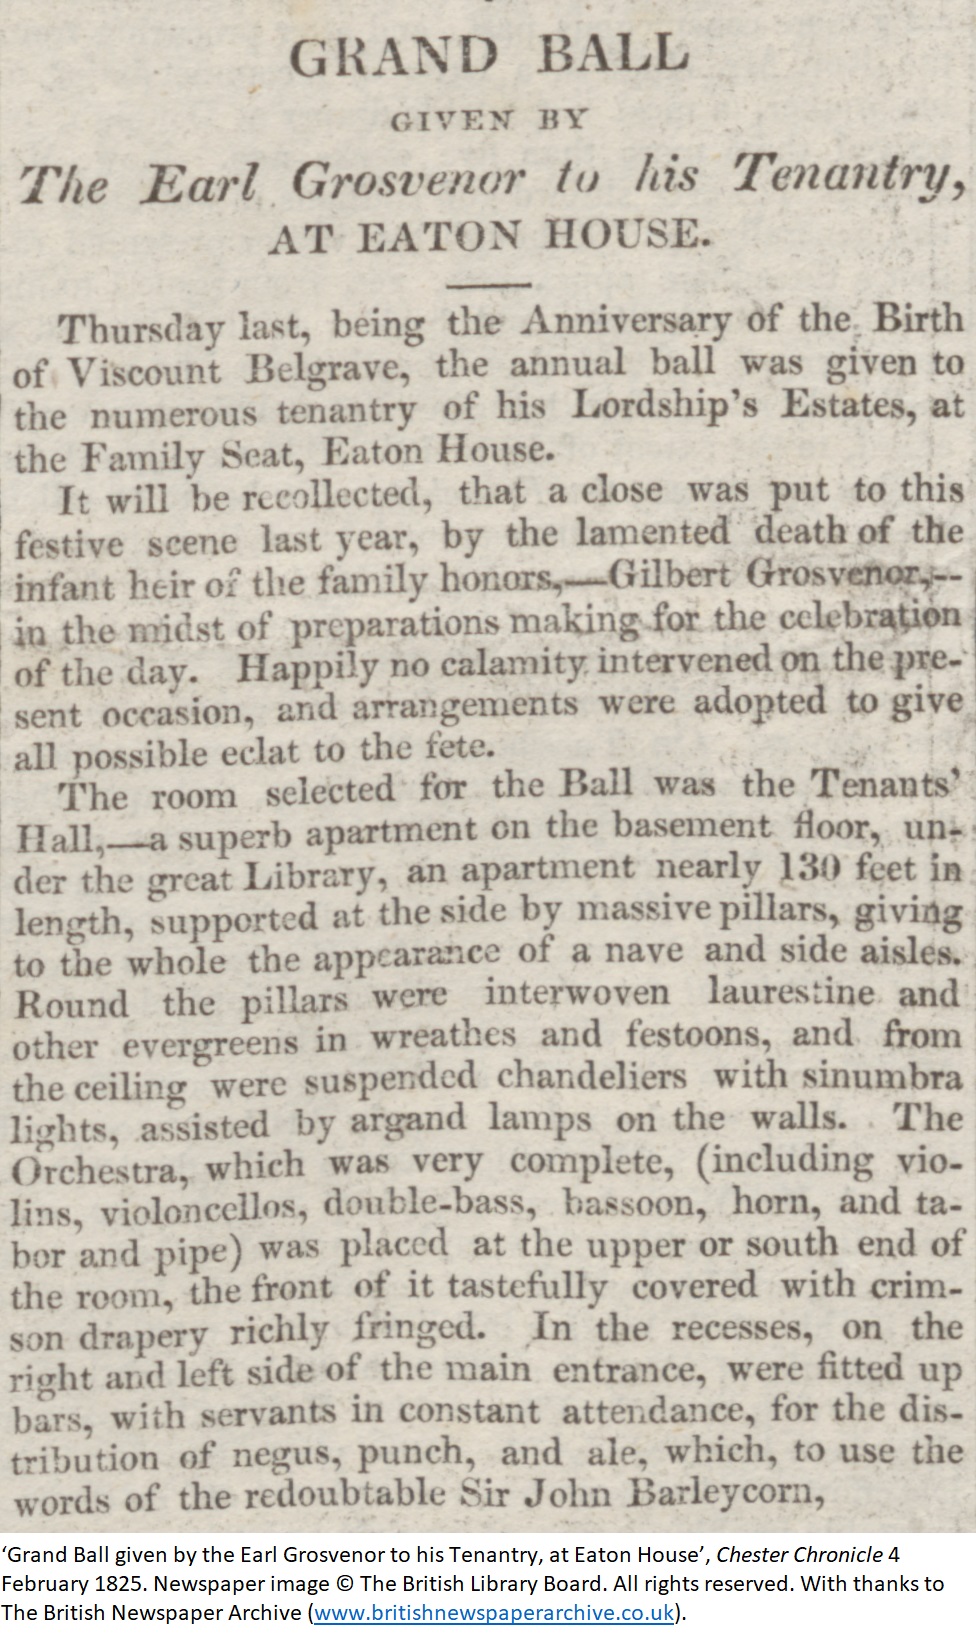 ‘Grand Ball given by the Earl Grosvenor to his Tenantry, at Eaton House’, Chester Chronicle 4 February 1825. Newspaper image © The British Library Board. All rights reserved. With thanks to The British Newspaper Archive (www.britishnewspaperarchive.co.uk).